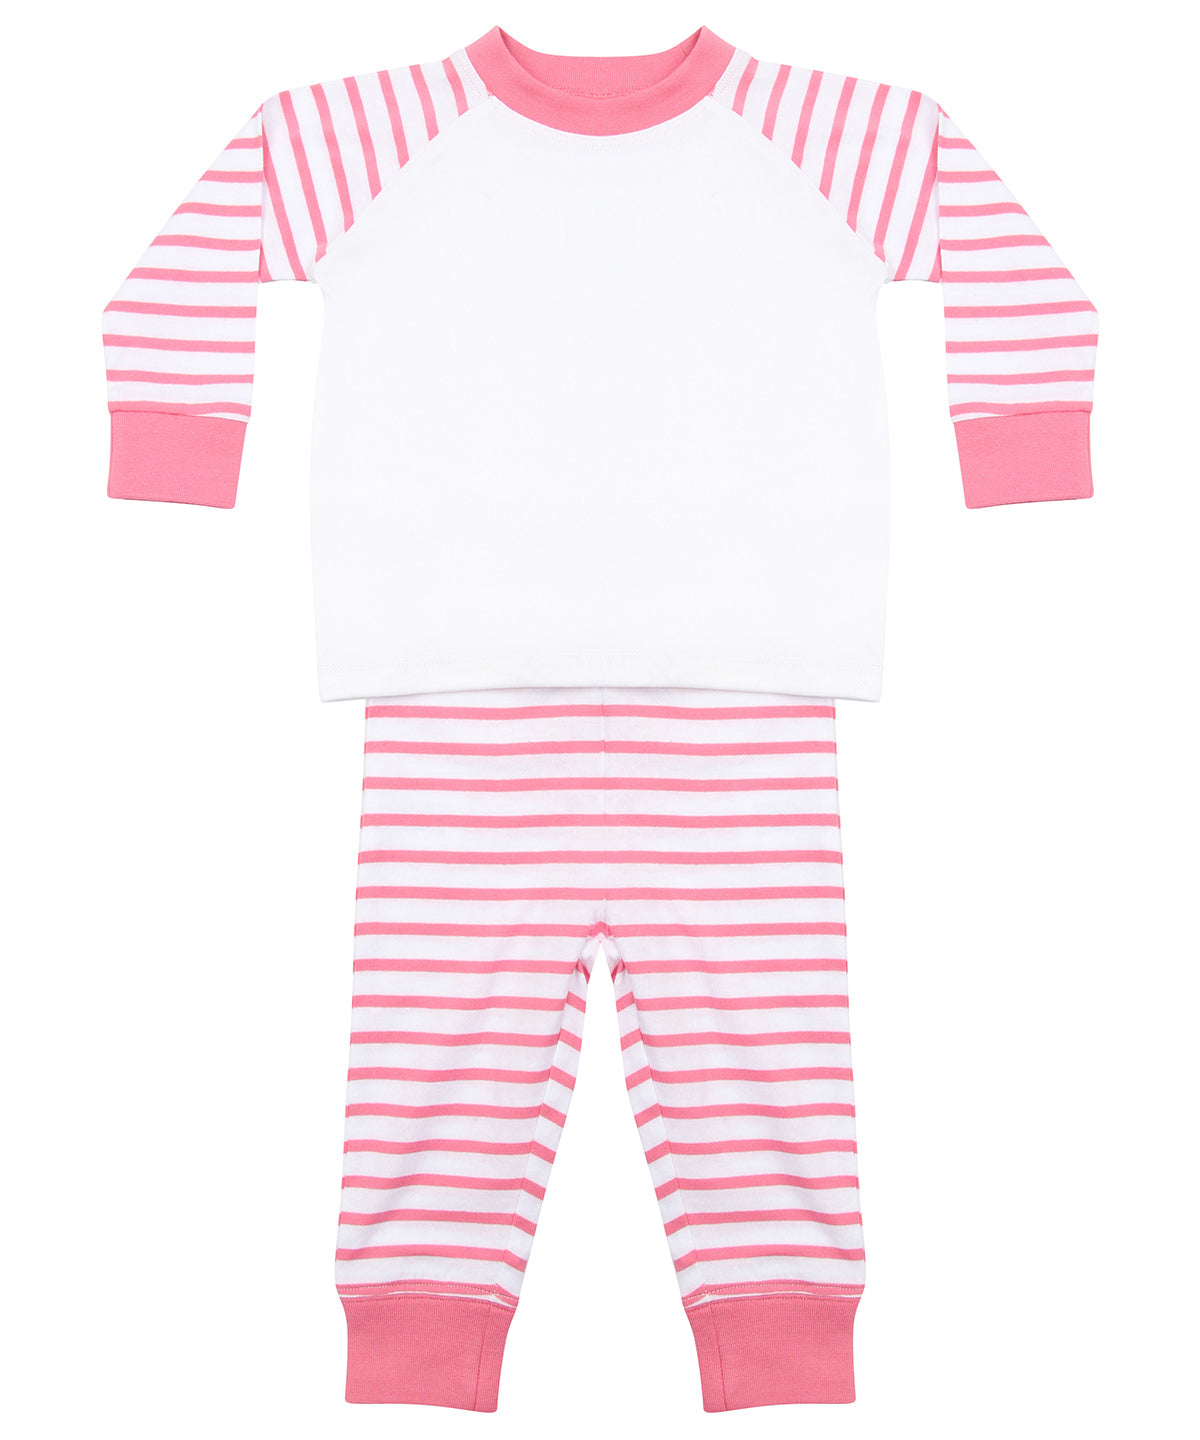 Baby Stripped Pyjamas personalised with Name